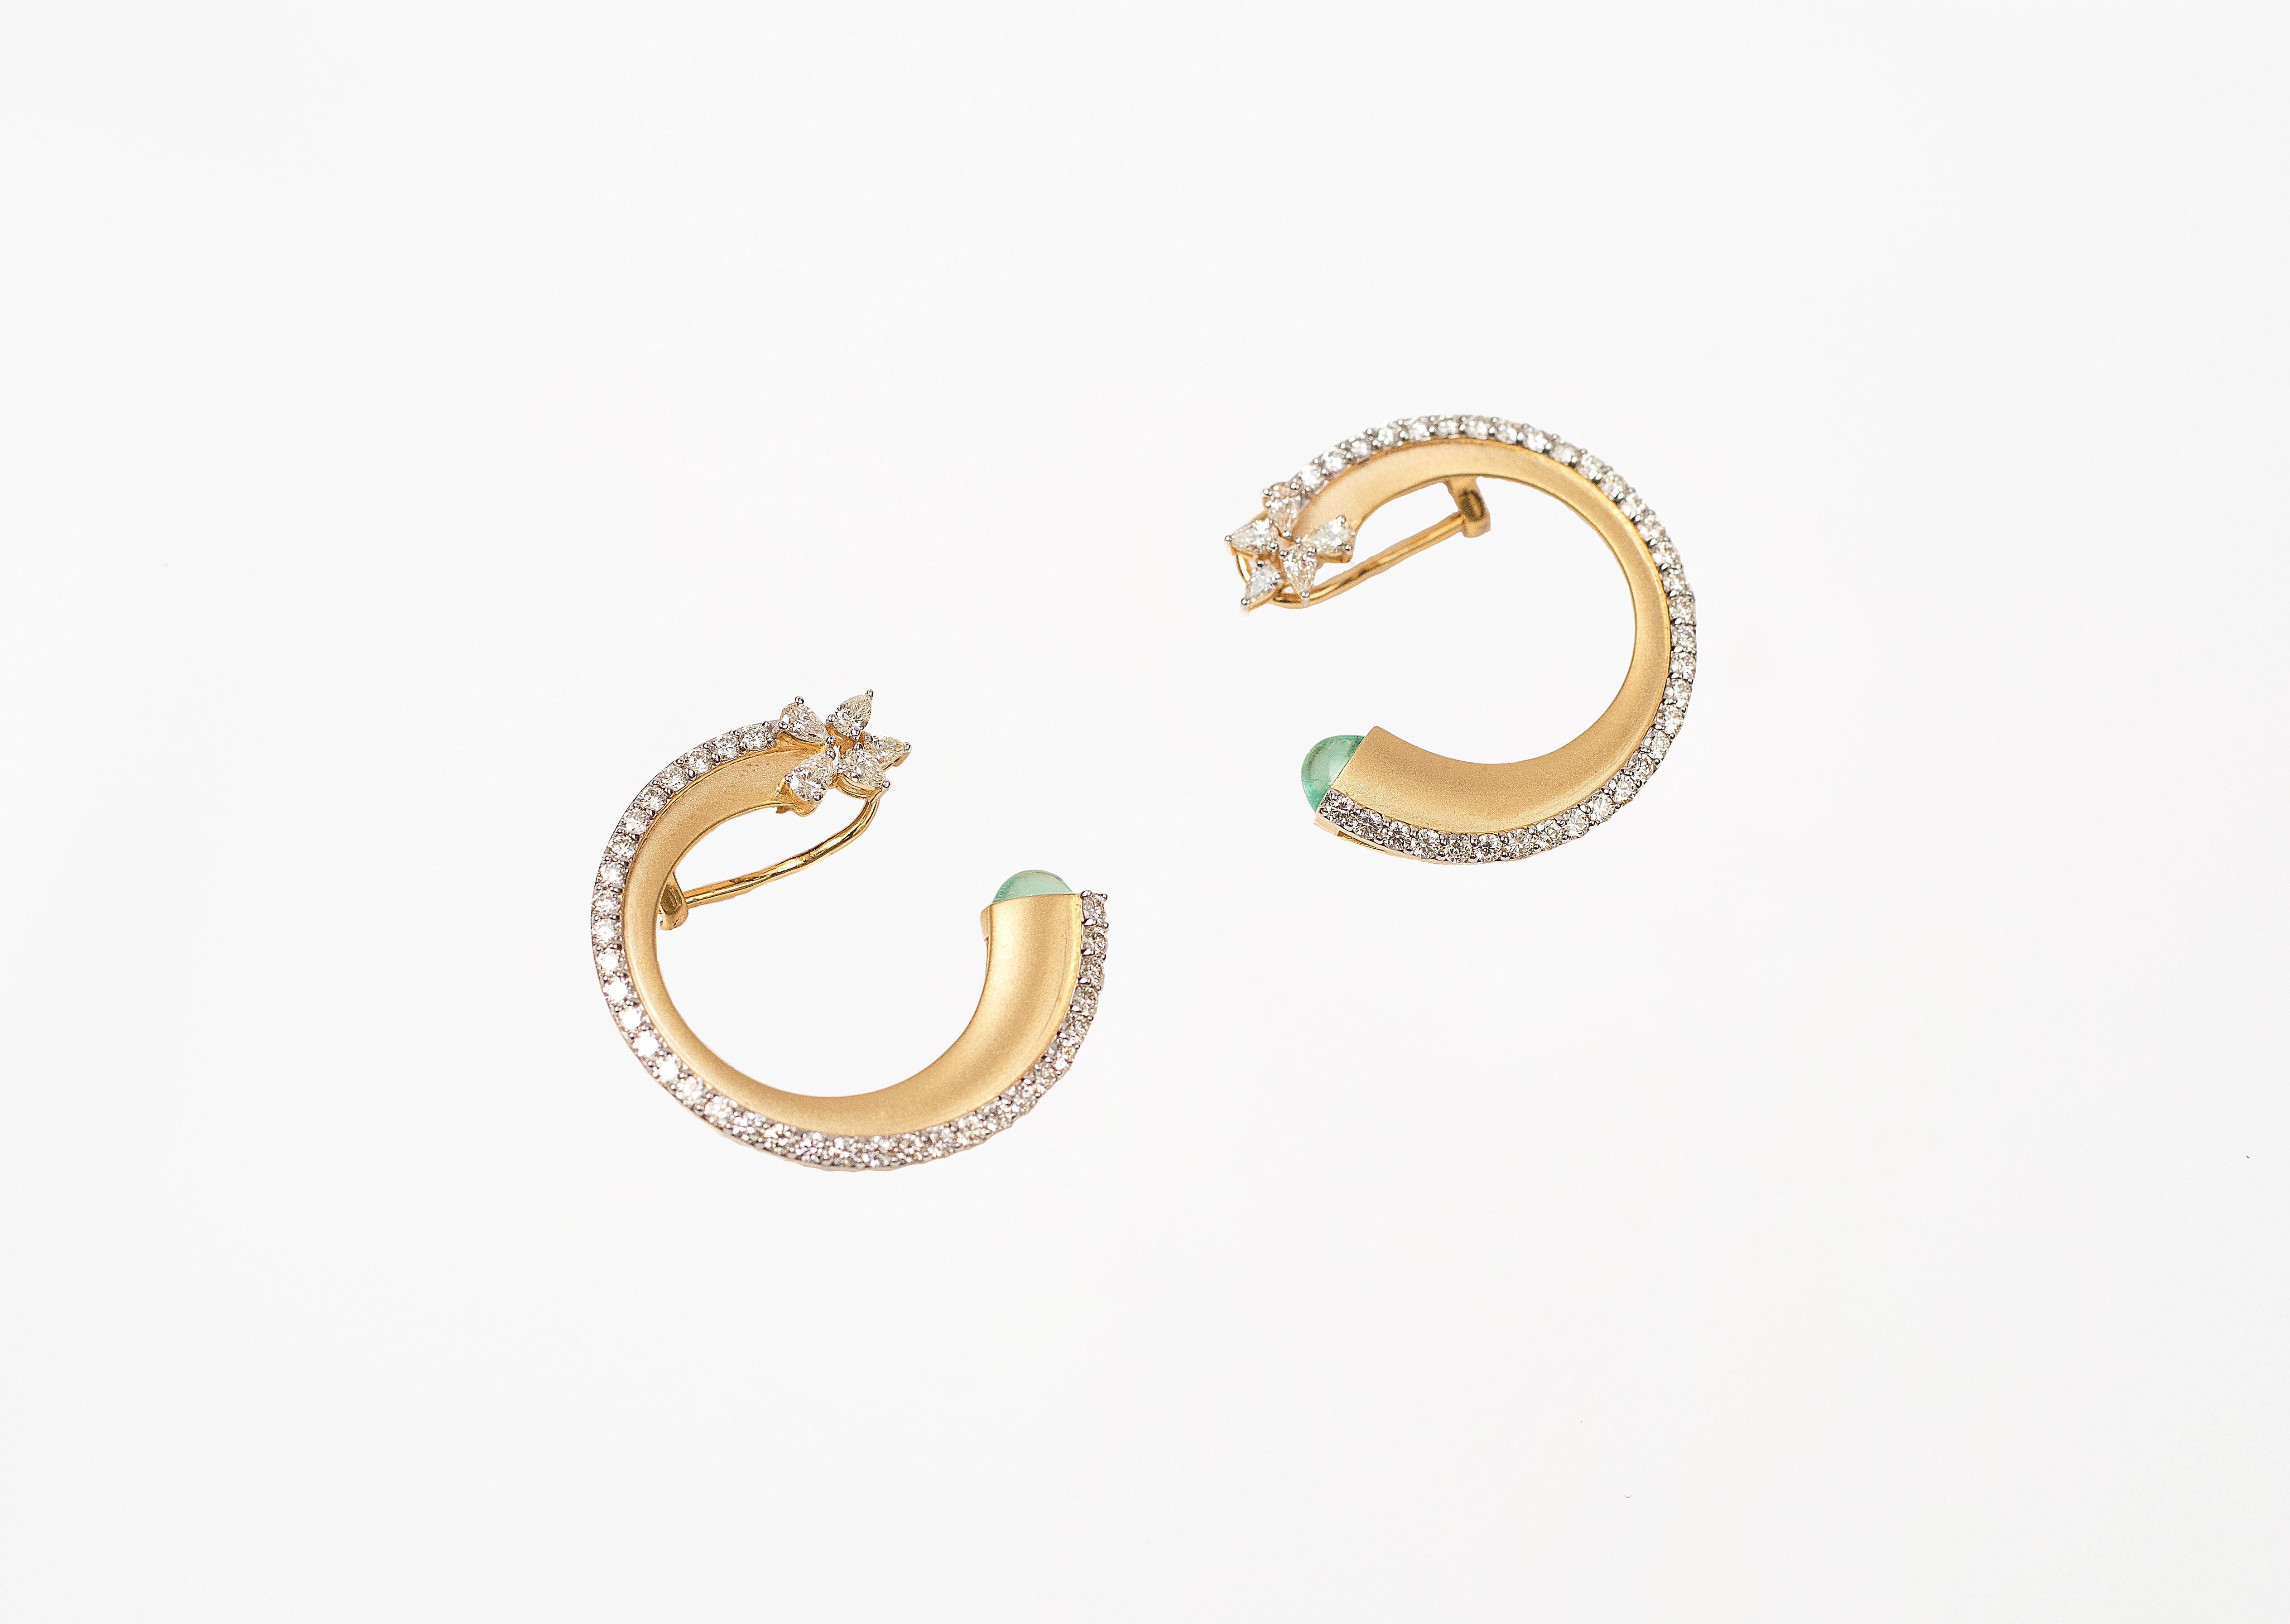 Handcrafted Contemporary Earrings in 18K Gold studded with 3.71 cts White Diamond and Natural Cabouchon Emeralds.
Gold Weight - 15.626
Diamond Weight - 3.71 cts
Emerald Weight - 2.17 cts 
Diamond Clarity - Vs
Colour - G
Emerald  - Natural
Post and